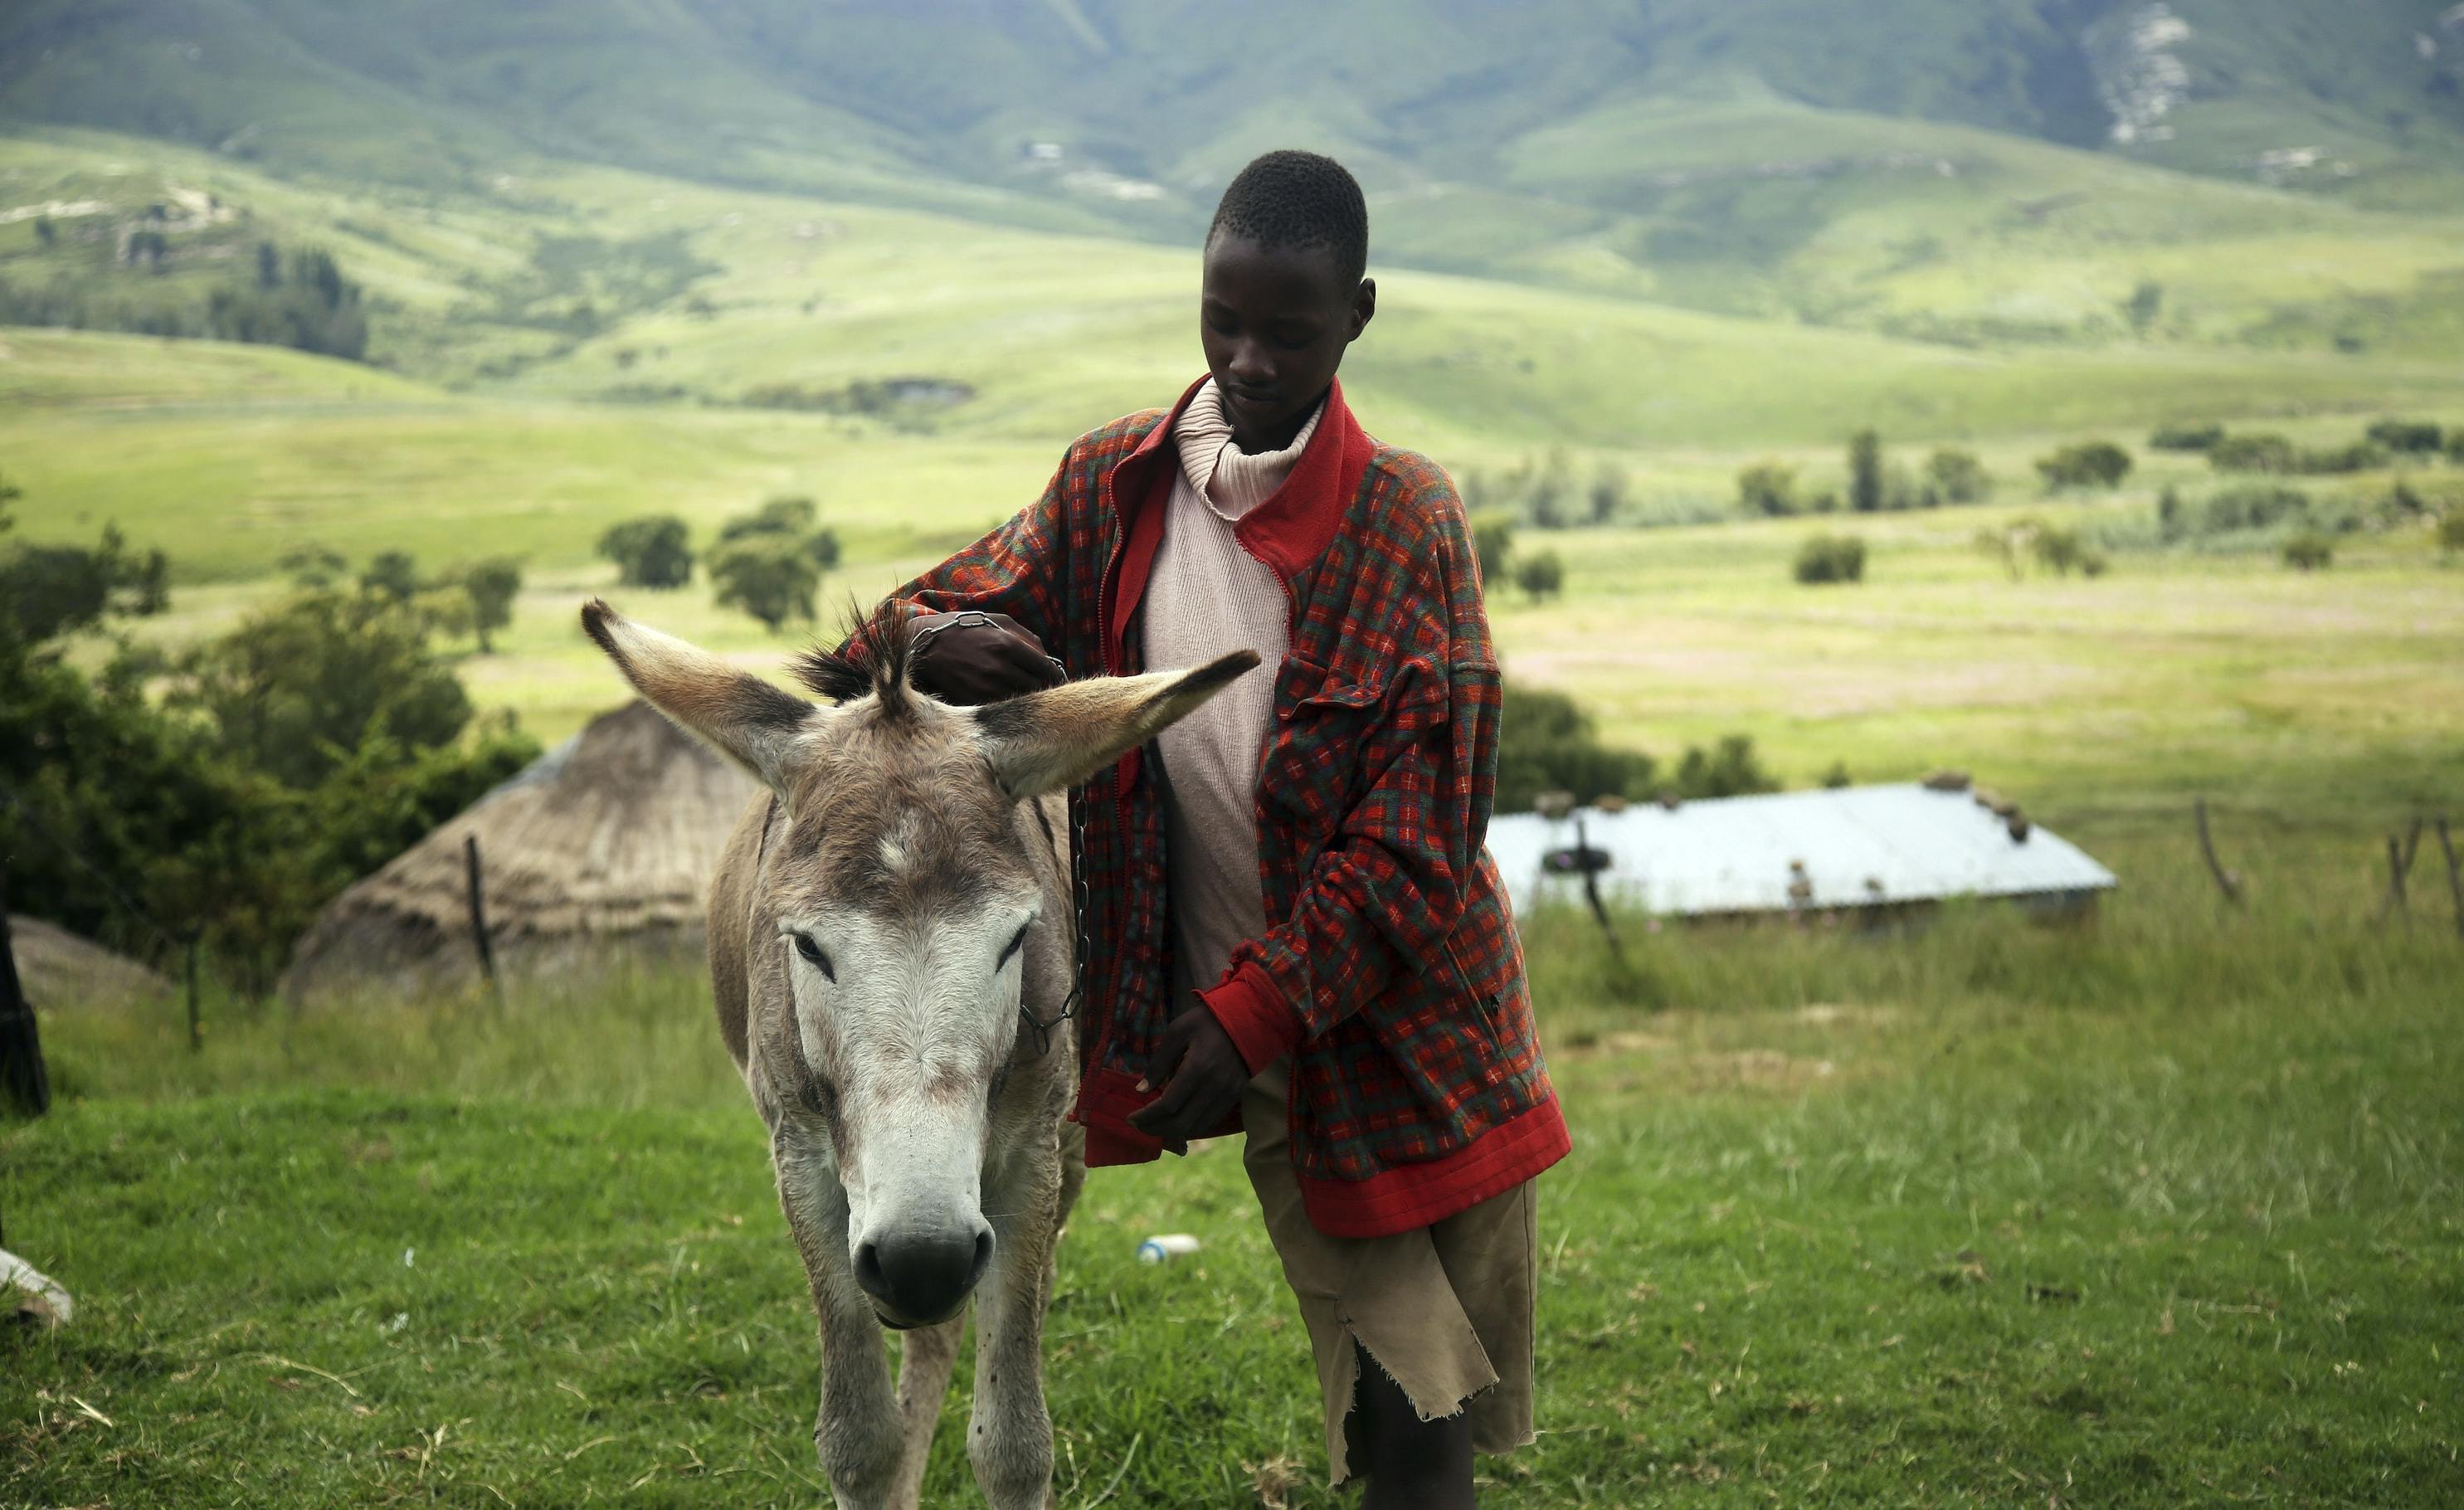 World Organisation for Animal Health Hero Image. A person petting a donkey